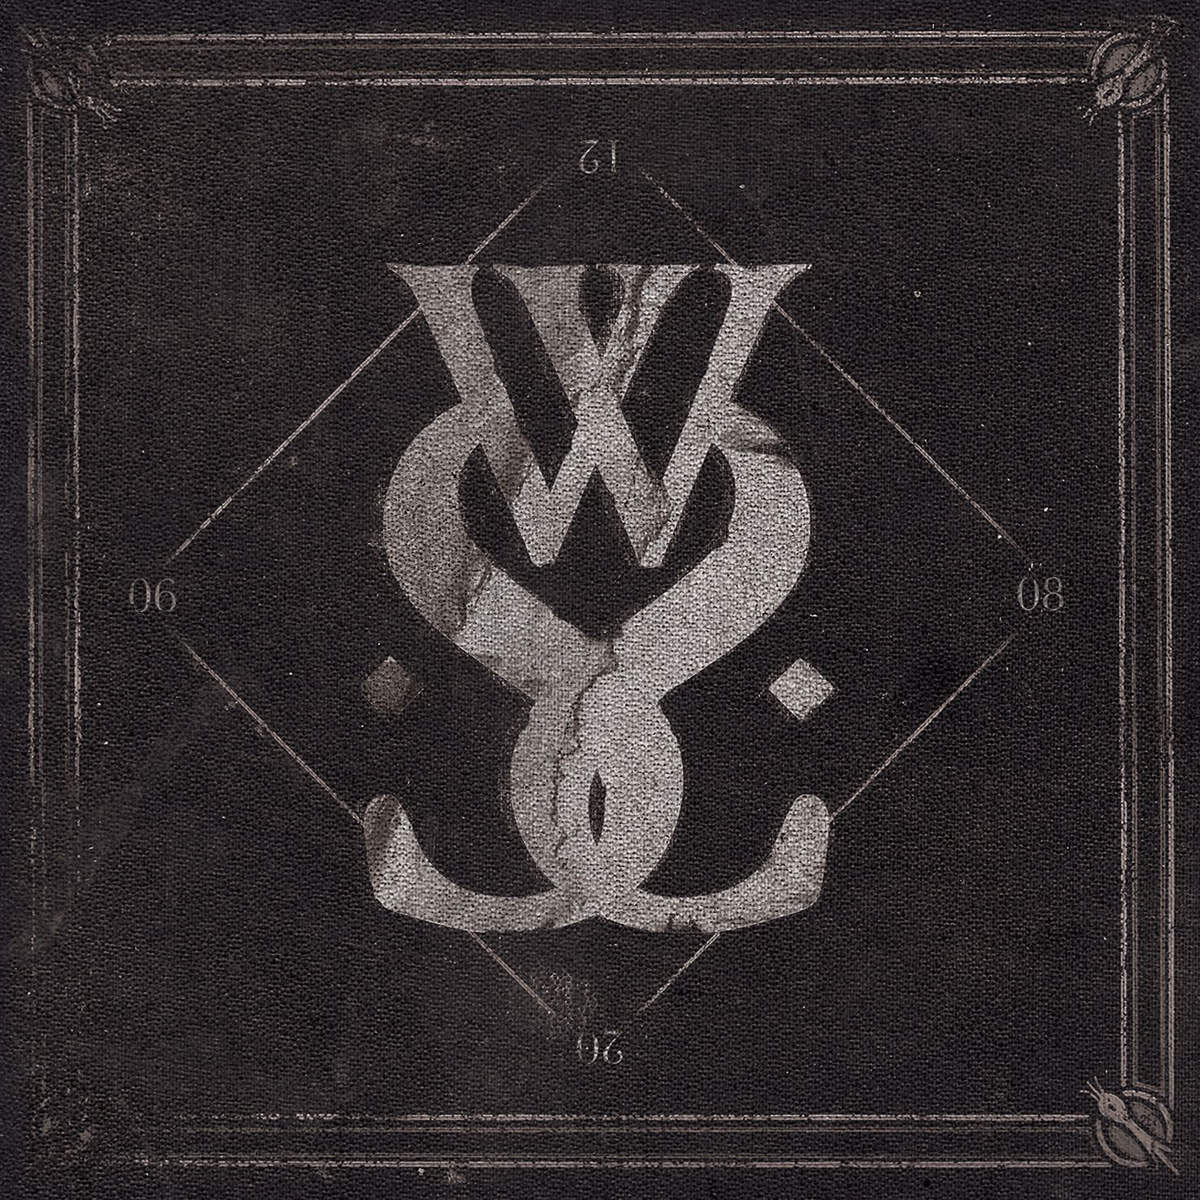 While She Sleeps - This Is The Six (2012)